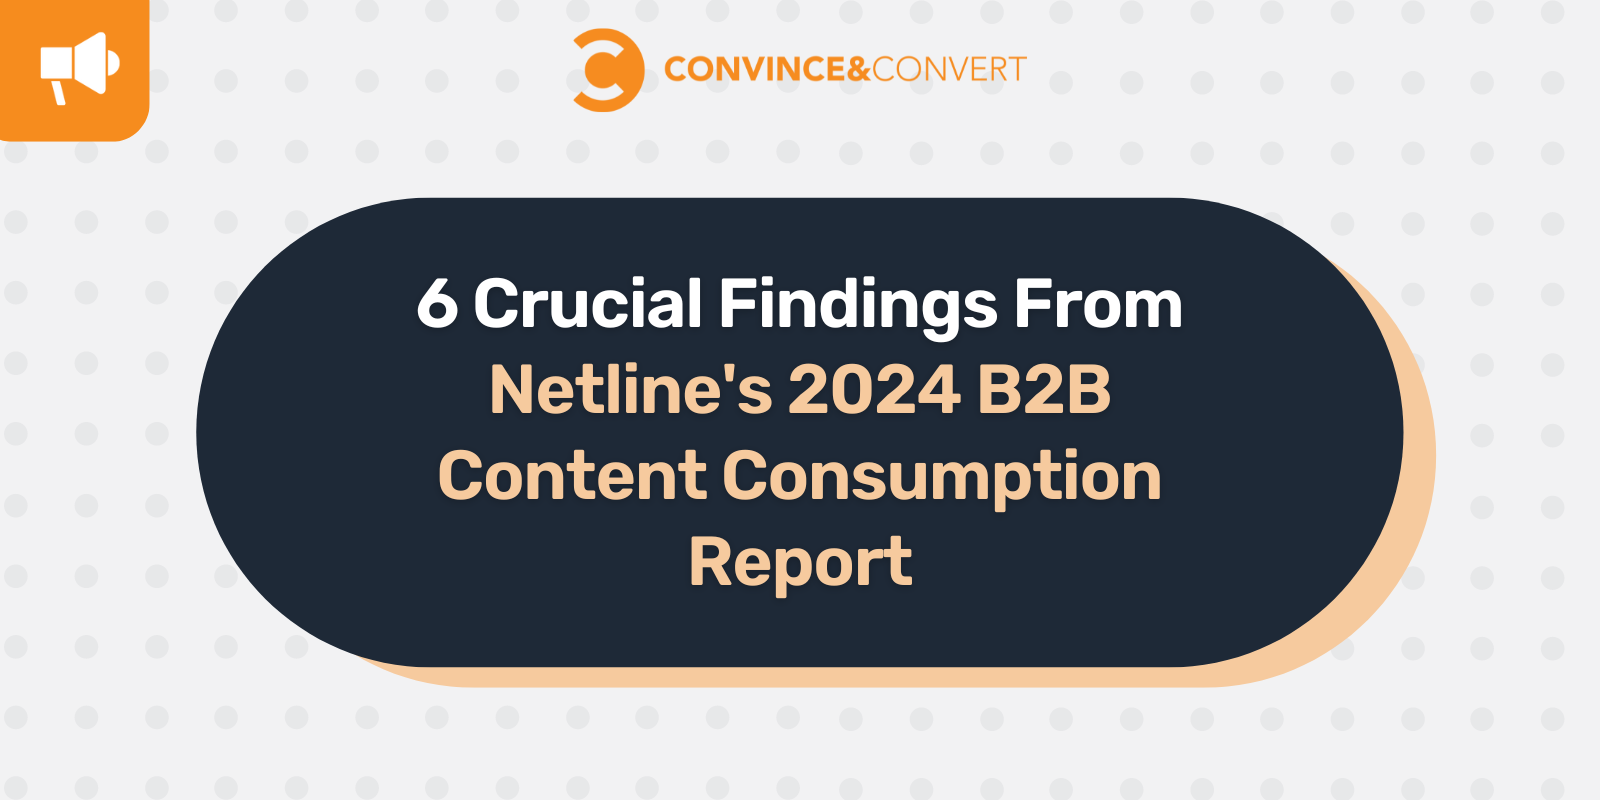 You are currently viewing 6 Crucial Findings From Netline’s 2024 B2B Content Consumption Report